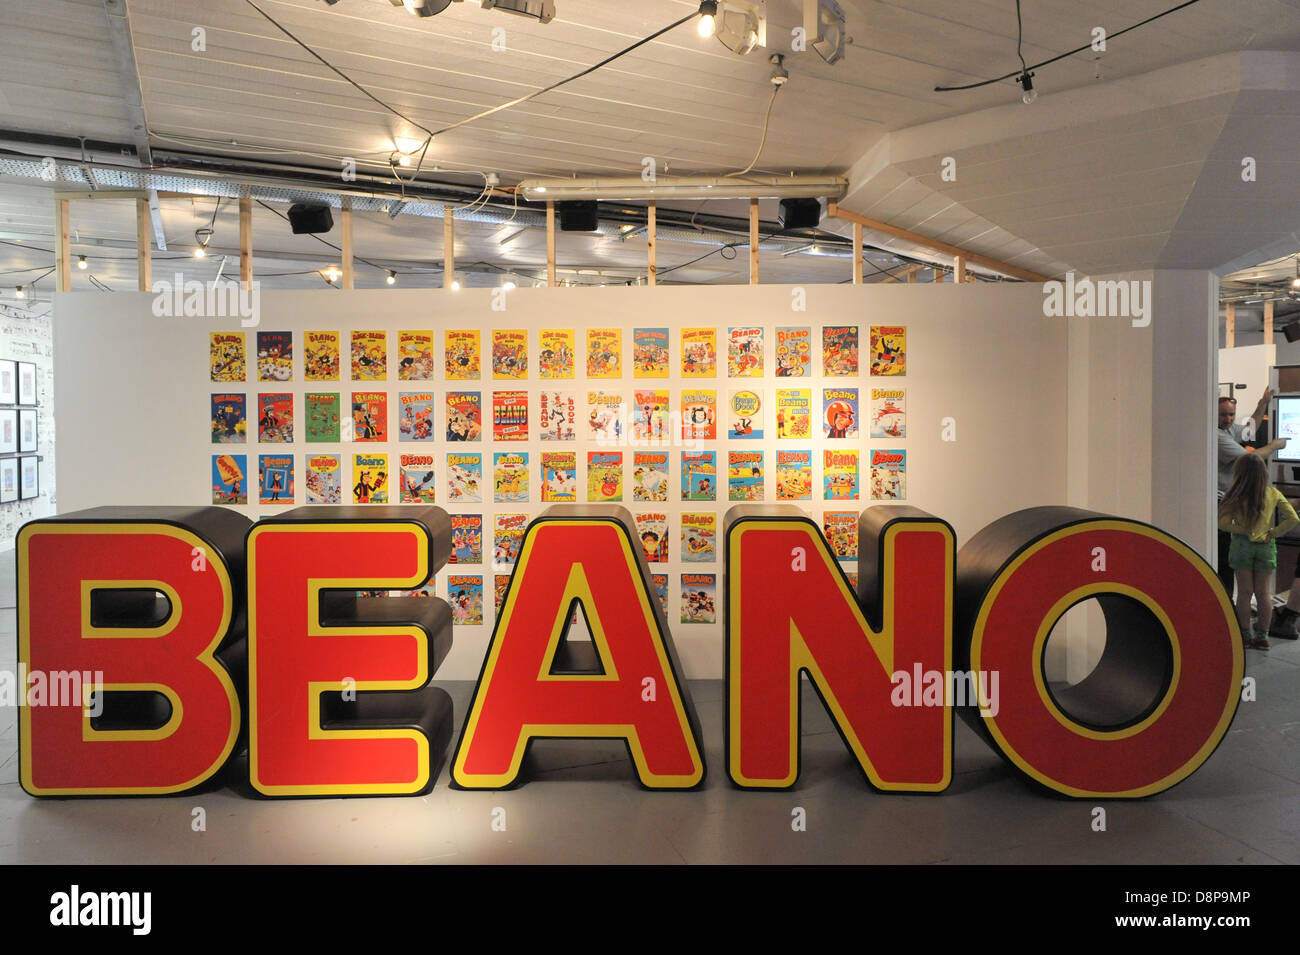 Southbank Centre, London, UK. 2nd June 2013. Inside Beanotown, a celebration of the children's comic. Beanotown in the Southbank Centre in London, 'Beanotown is the home of Dennis the Menace and Gnasher, The Bash Street Kids, Minnie the Minx, Roger the Dodger, plus all the other comic strip superstars from The Beano'. Beanotown is on from 31st May to 8th September. Credit:  Matthew Chattle/Alamy Live News Stock Photo